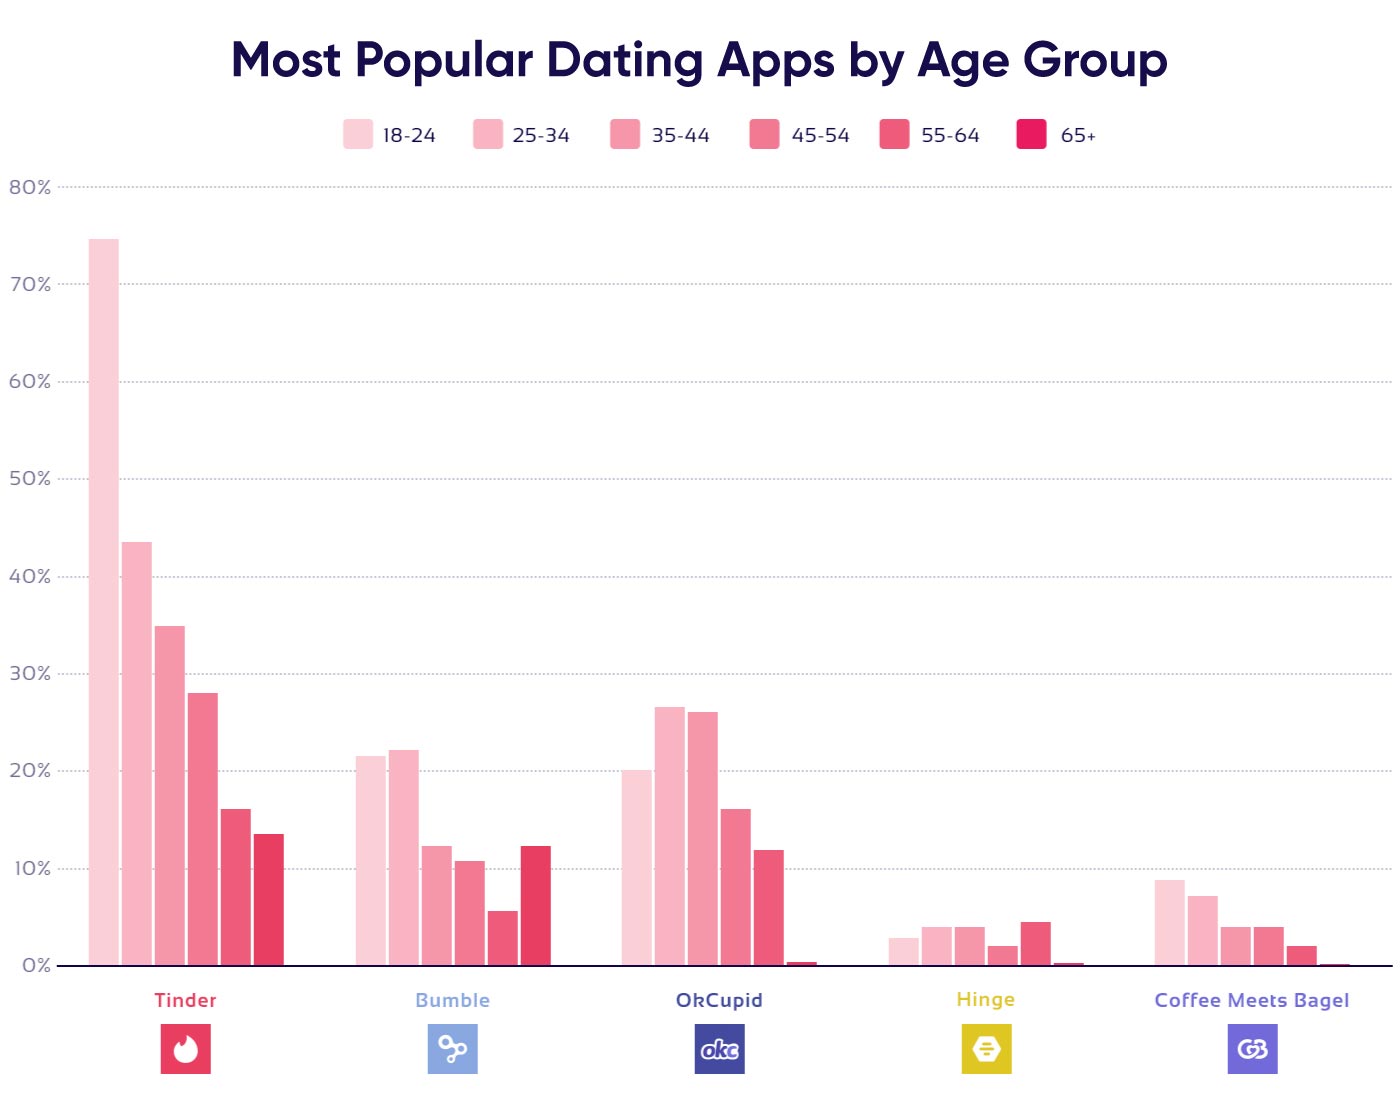 Dating Chart Crazy